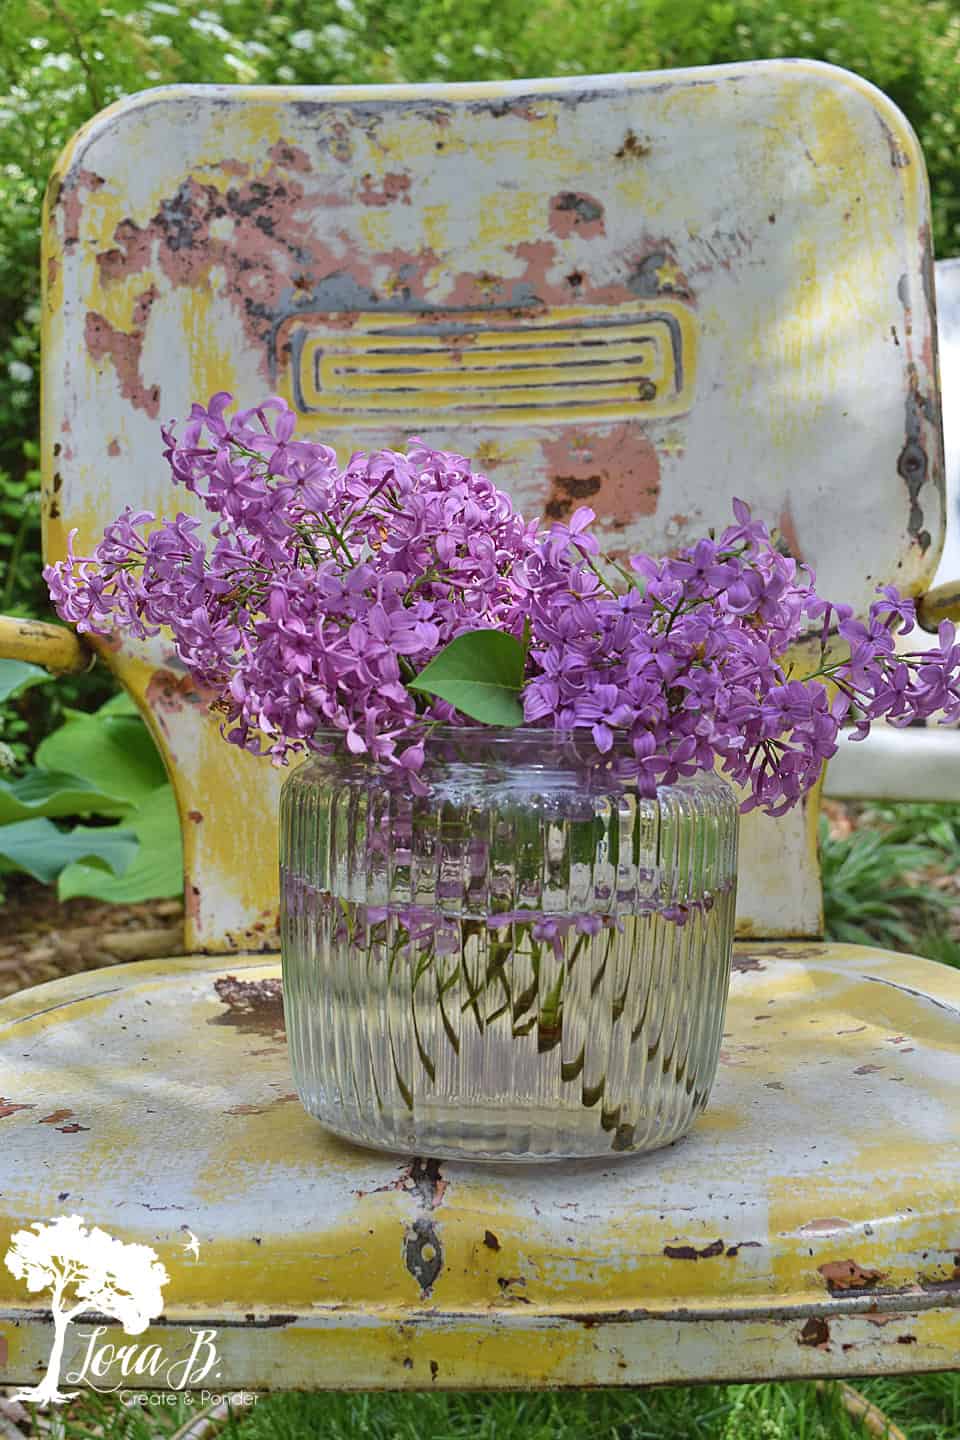 Lilacs on a vintage lawn chair.